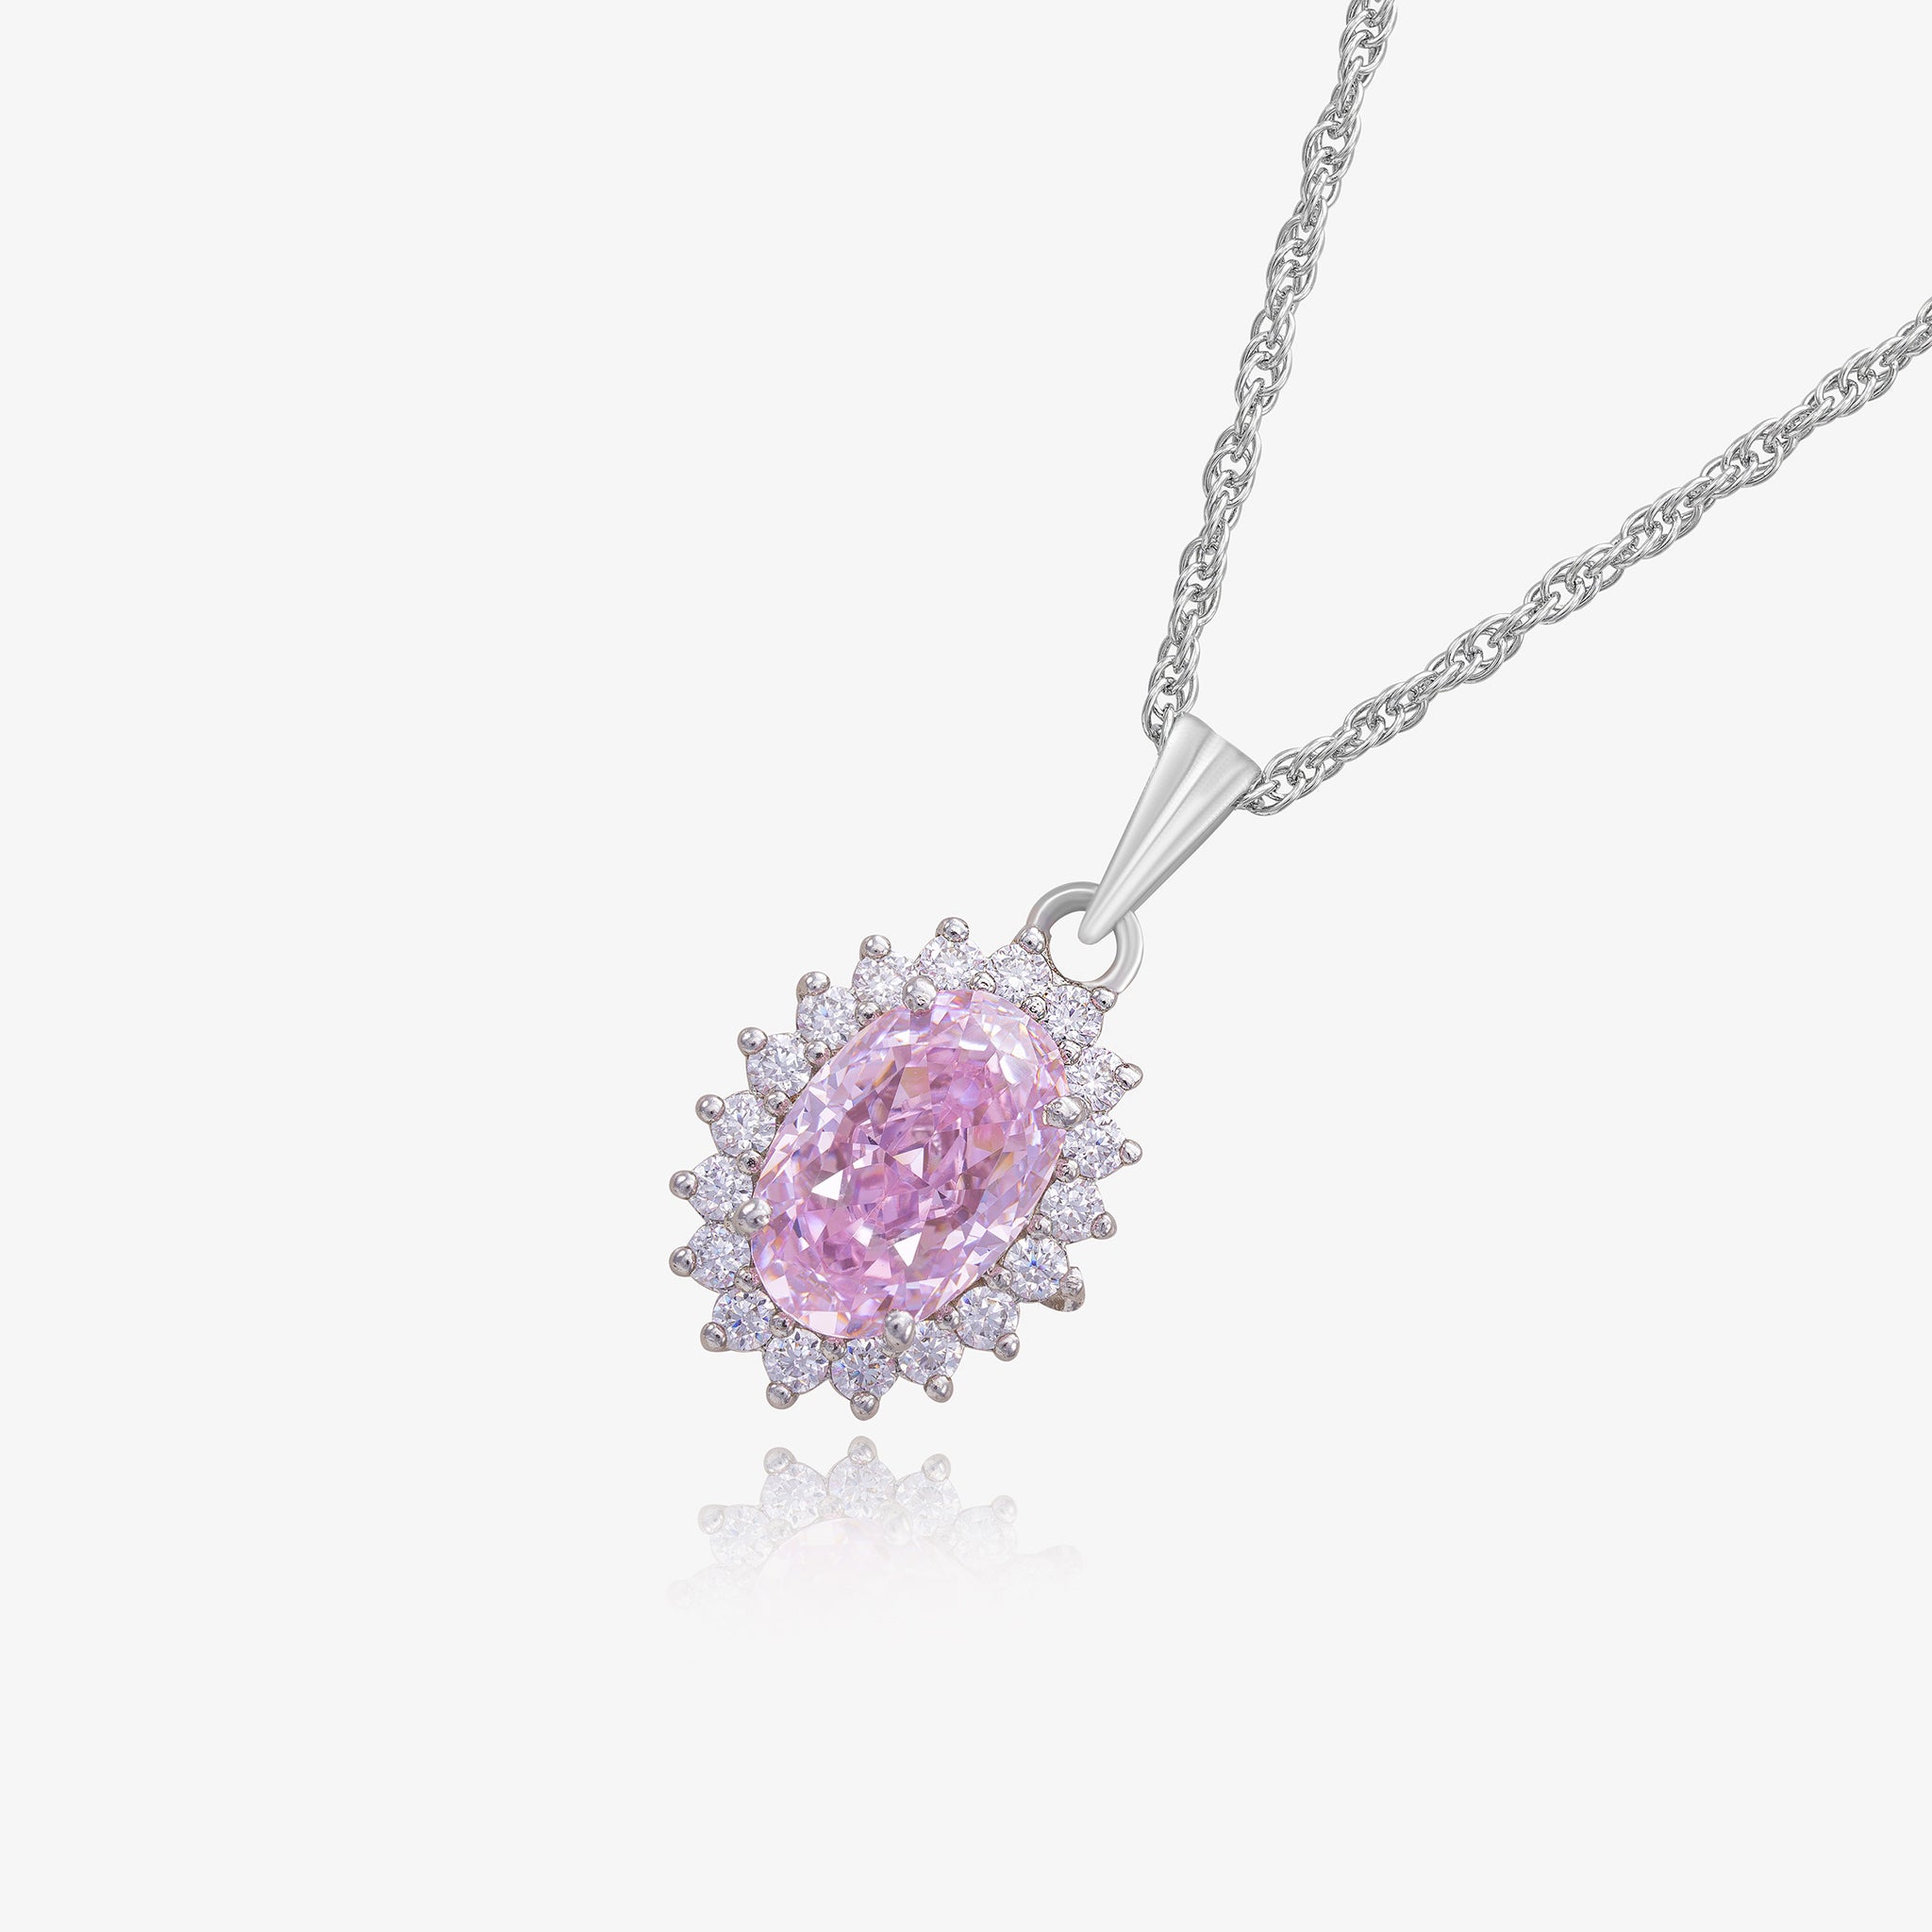 Halo Set Oval Pink Sapphire Premium Natural Gemstone Pendant With Rope Chain In 925 Sterling Silver